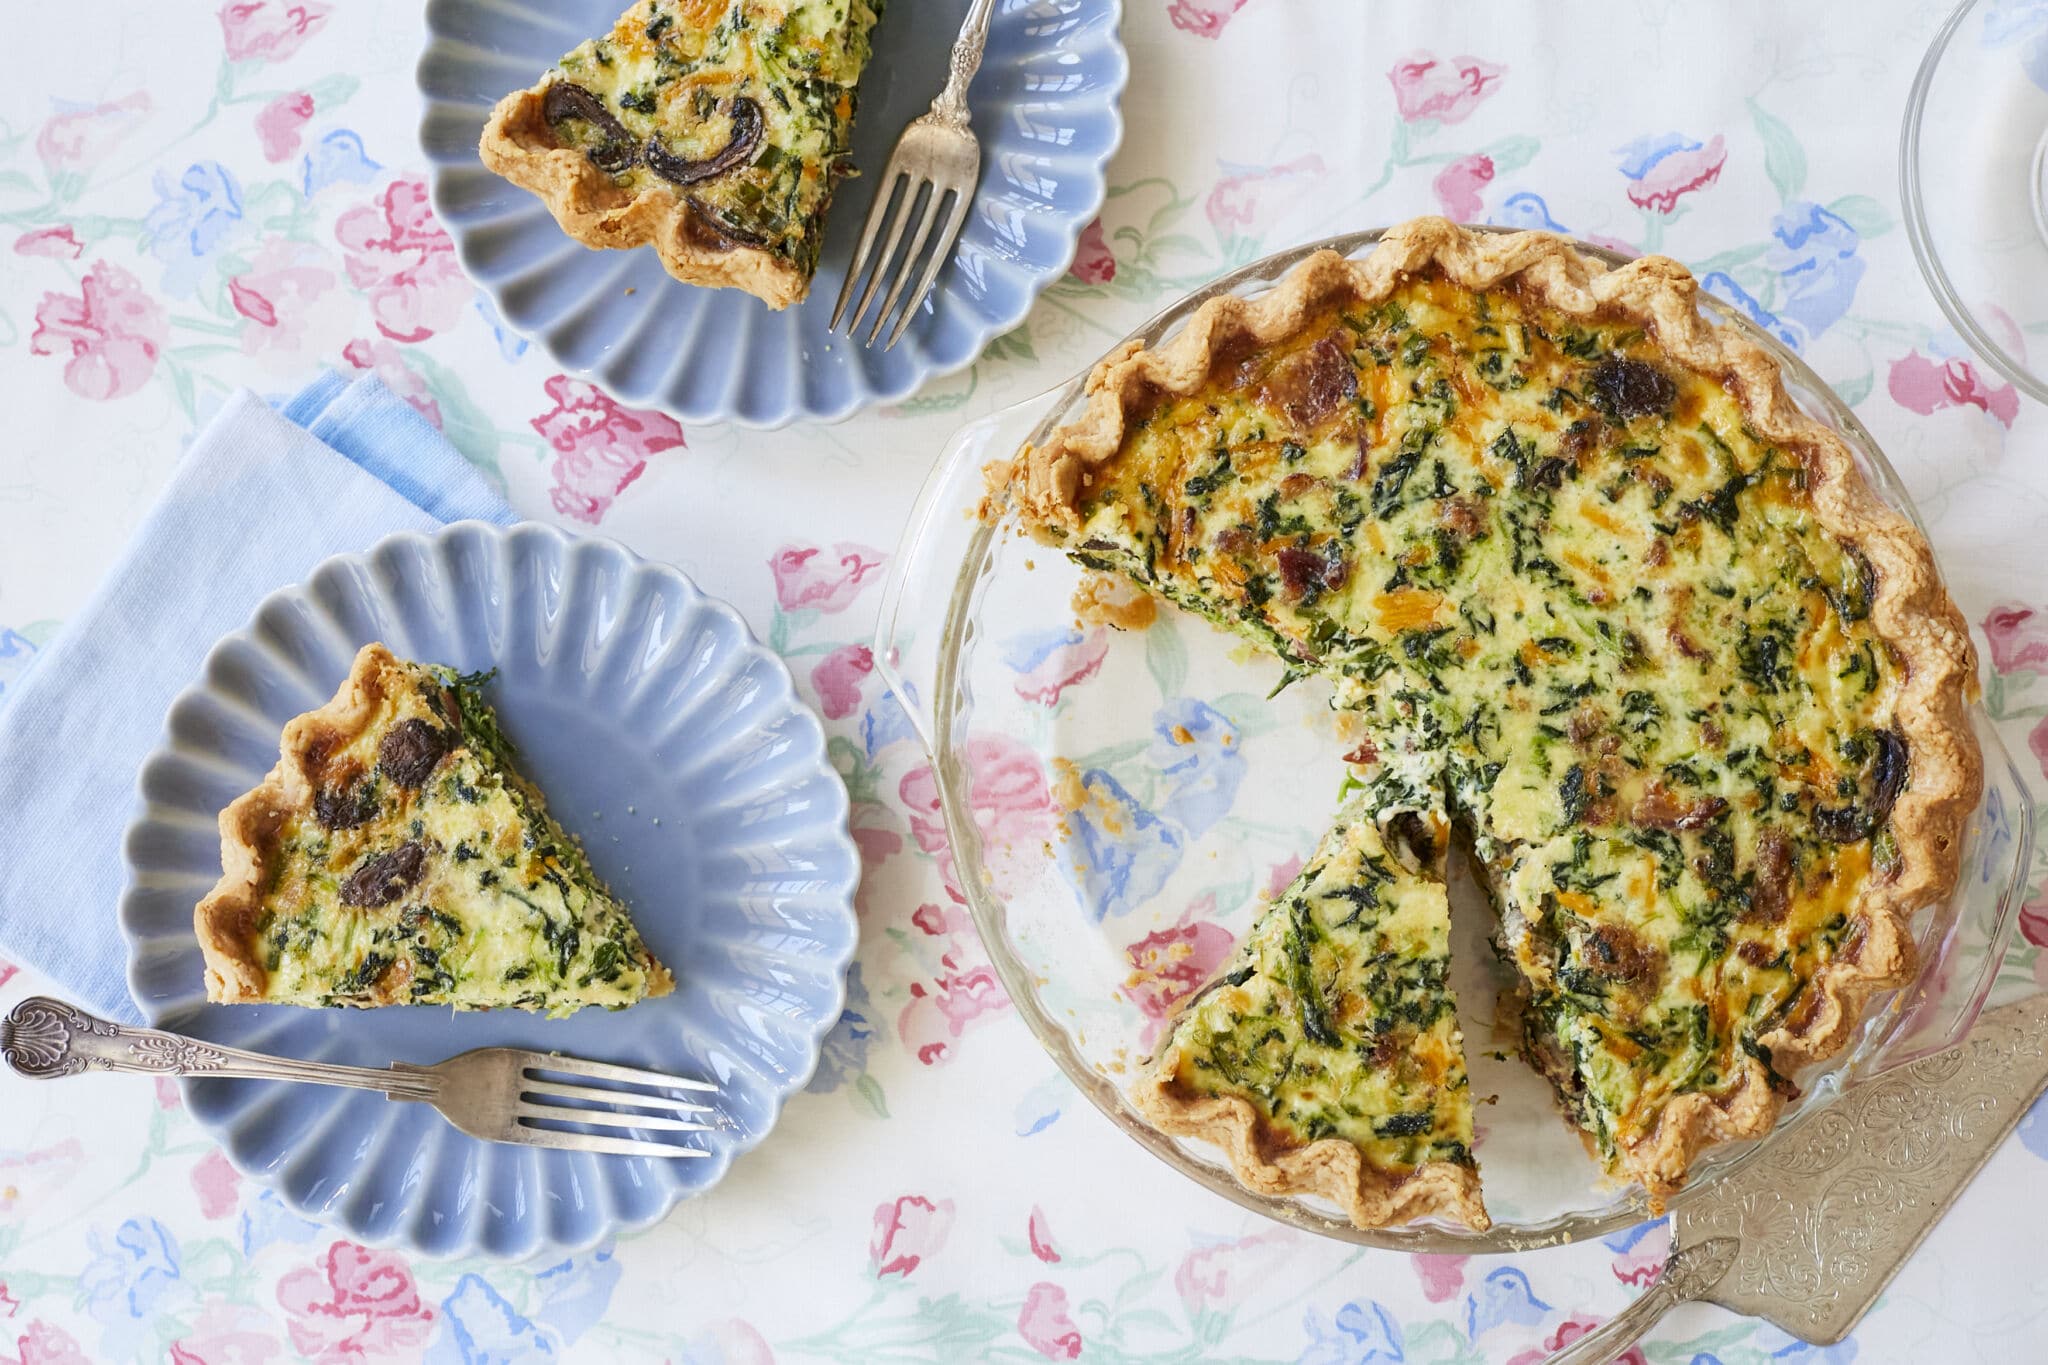 https://www.biggerbolderbaking.com/wp-content/uploads/2022/12/How-to-Make-quiche-Thumbnail-1-scaled.jpg